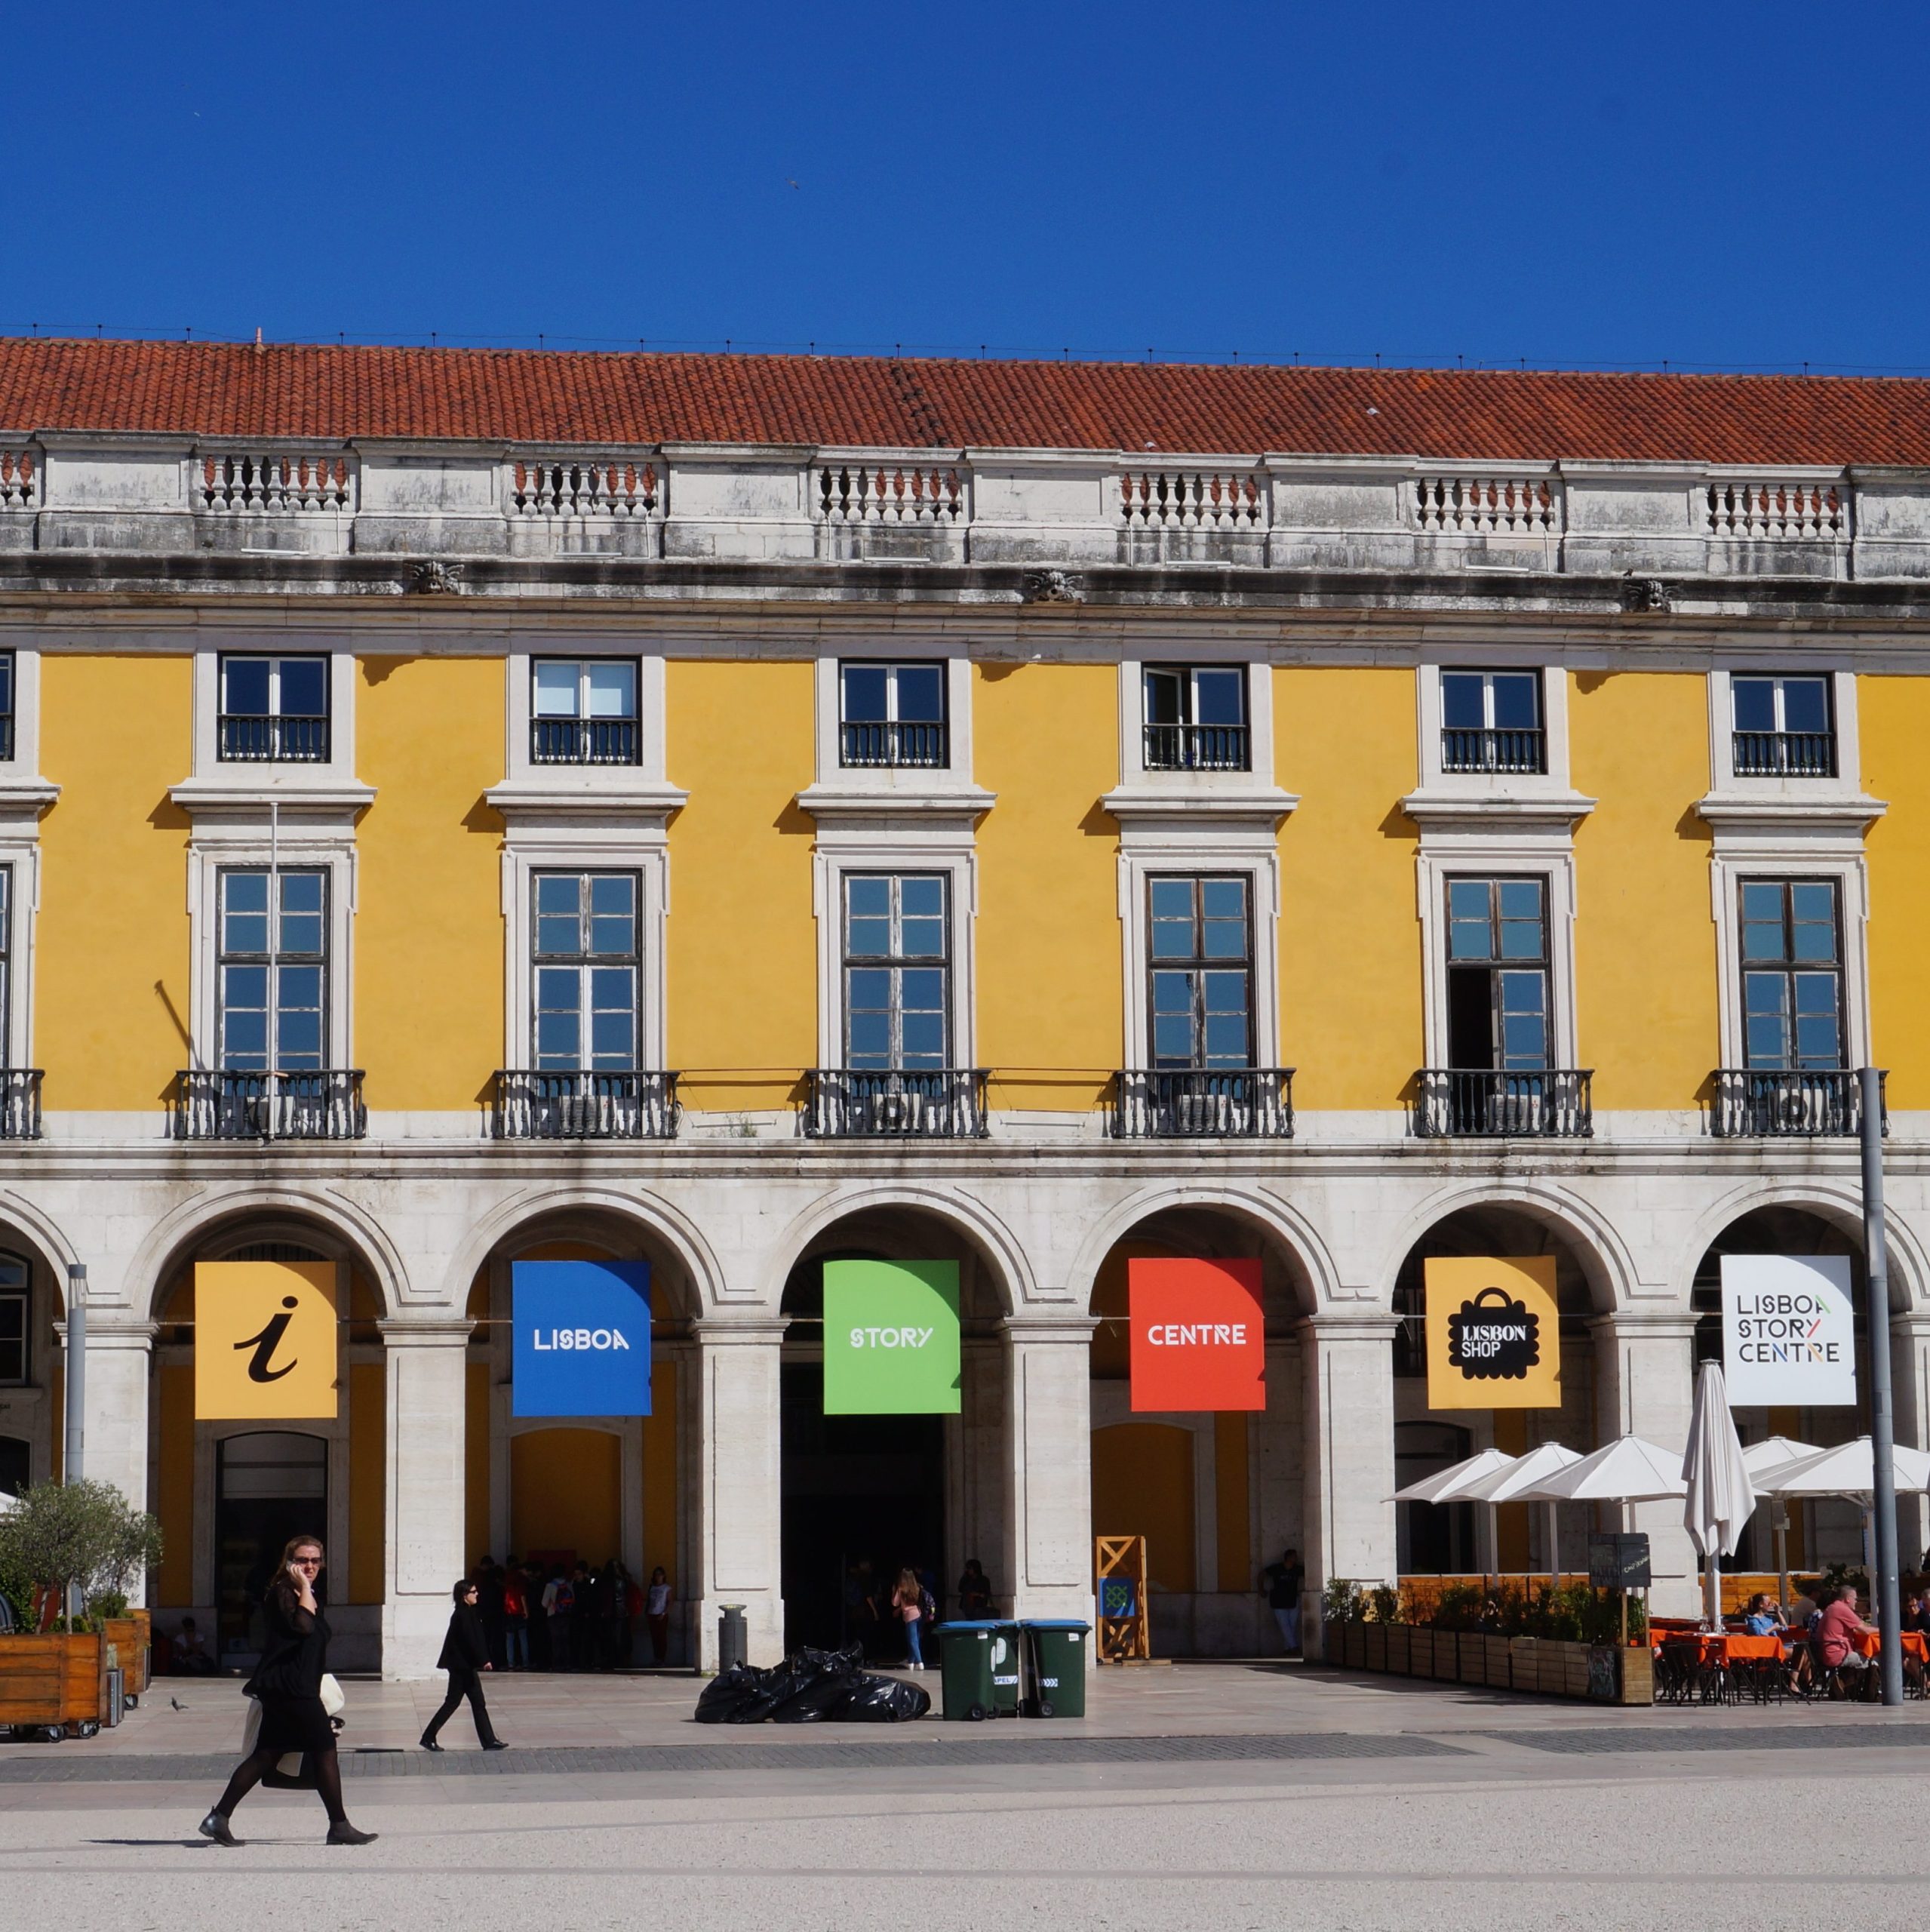 musea in Lissabon Lison story centre